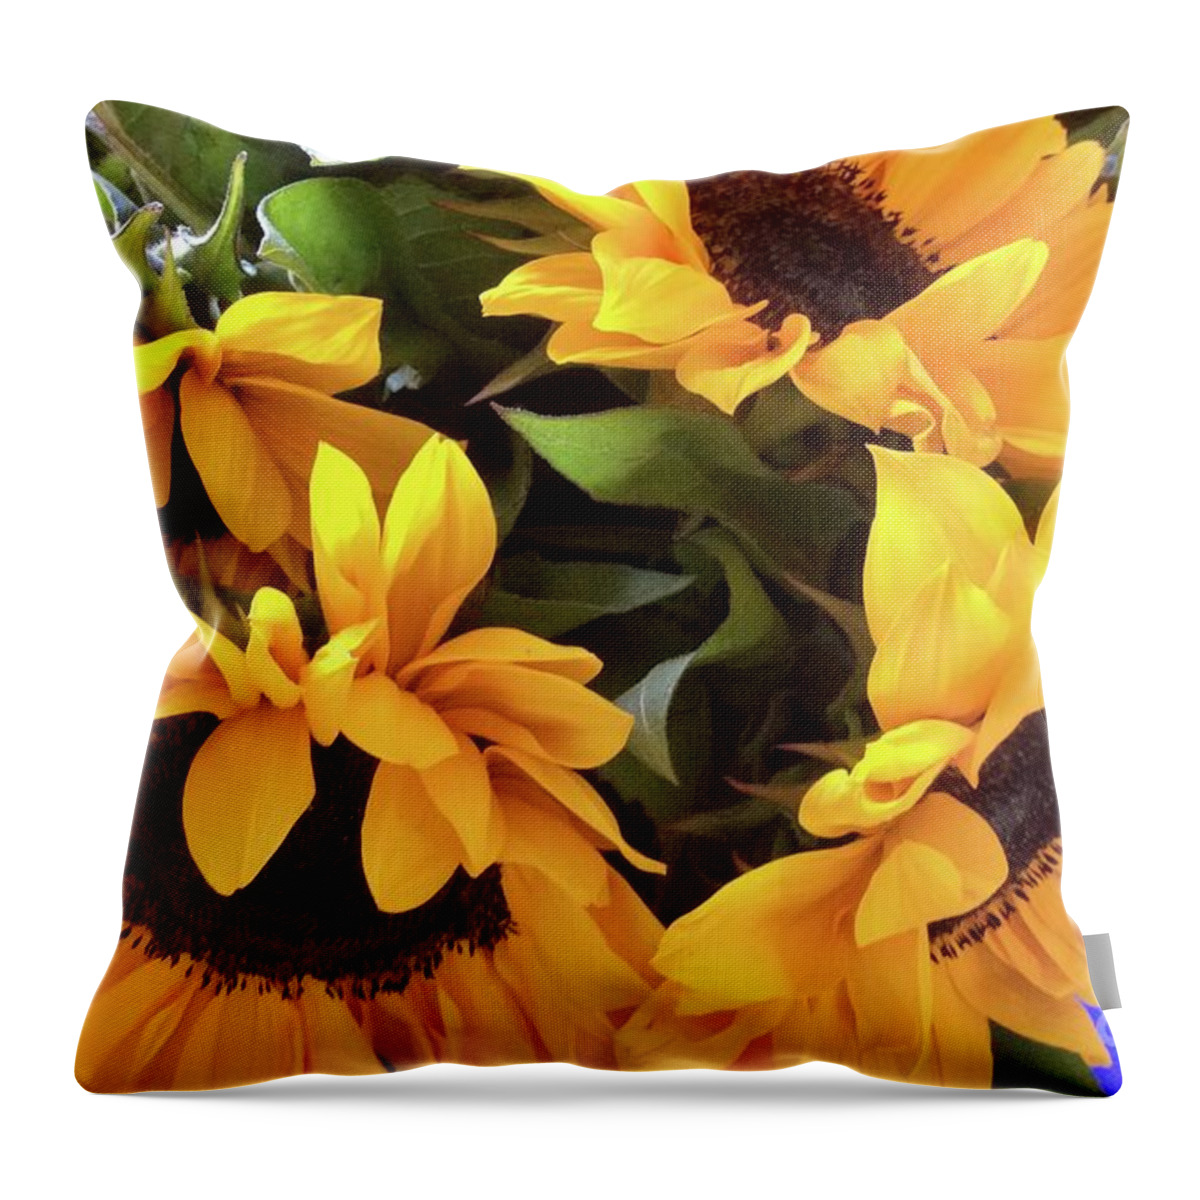 Sunny Throw Pillow featuring the photograph Sunflower Series 1-2 by J Doyne Miller